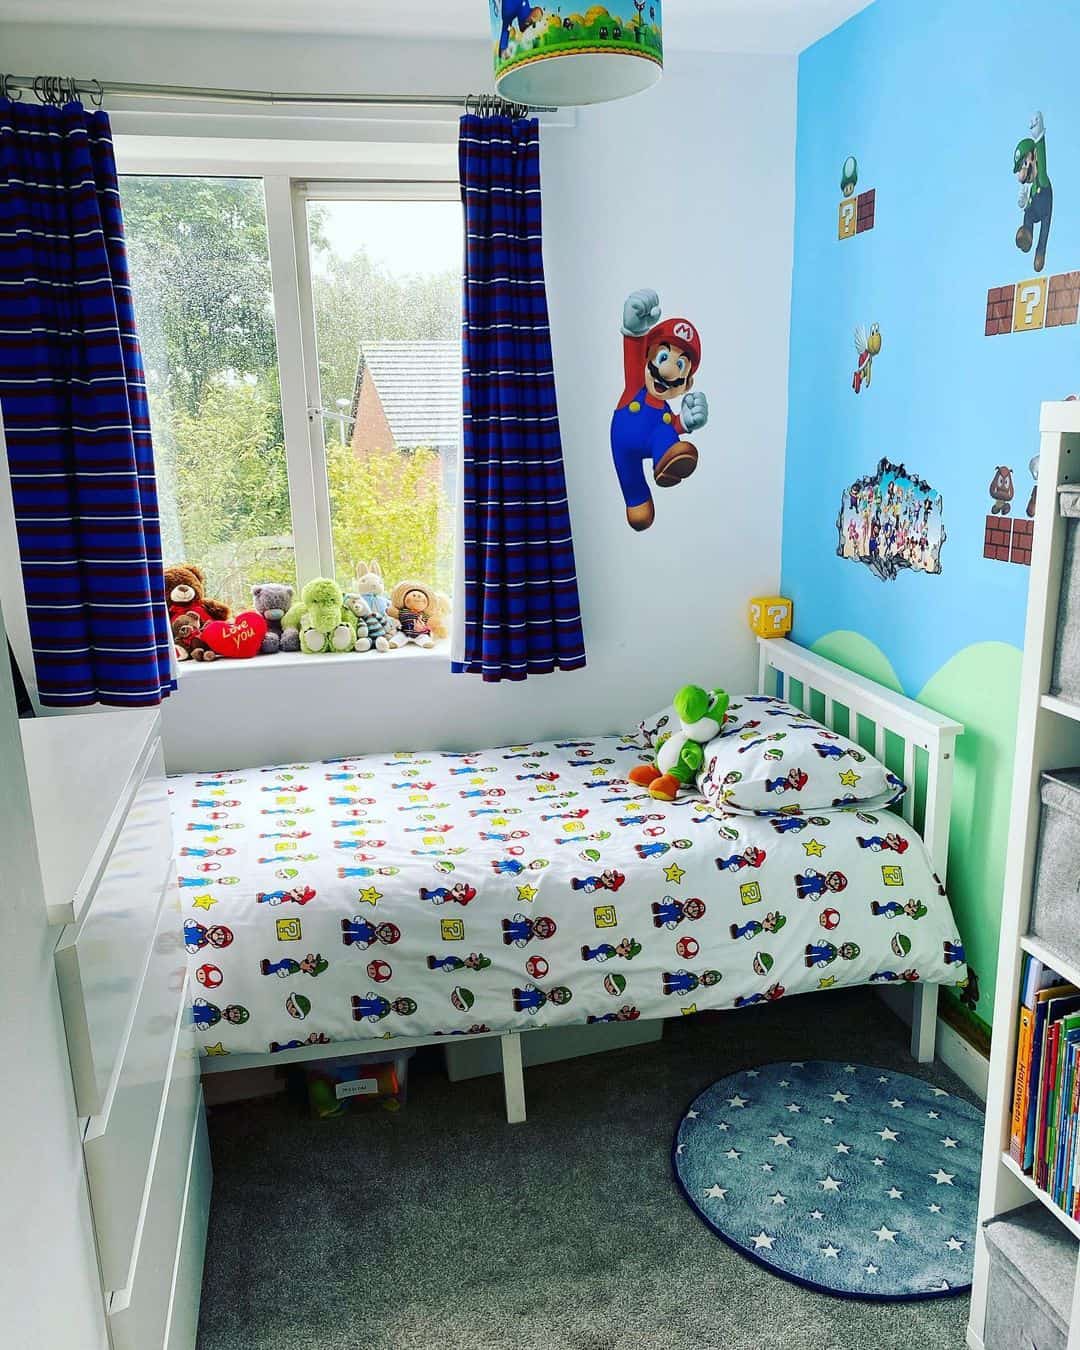 Cool Mario Bedroom Stuff And 9+ Ideas To Re-create!